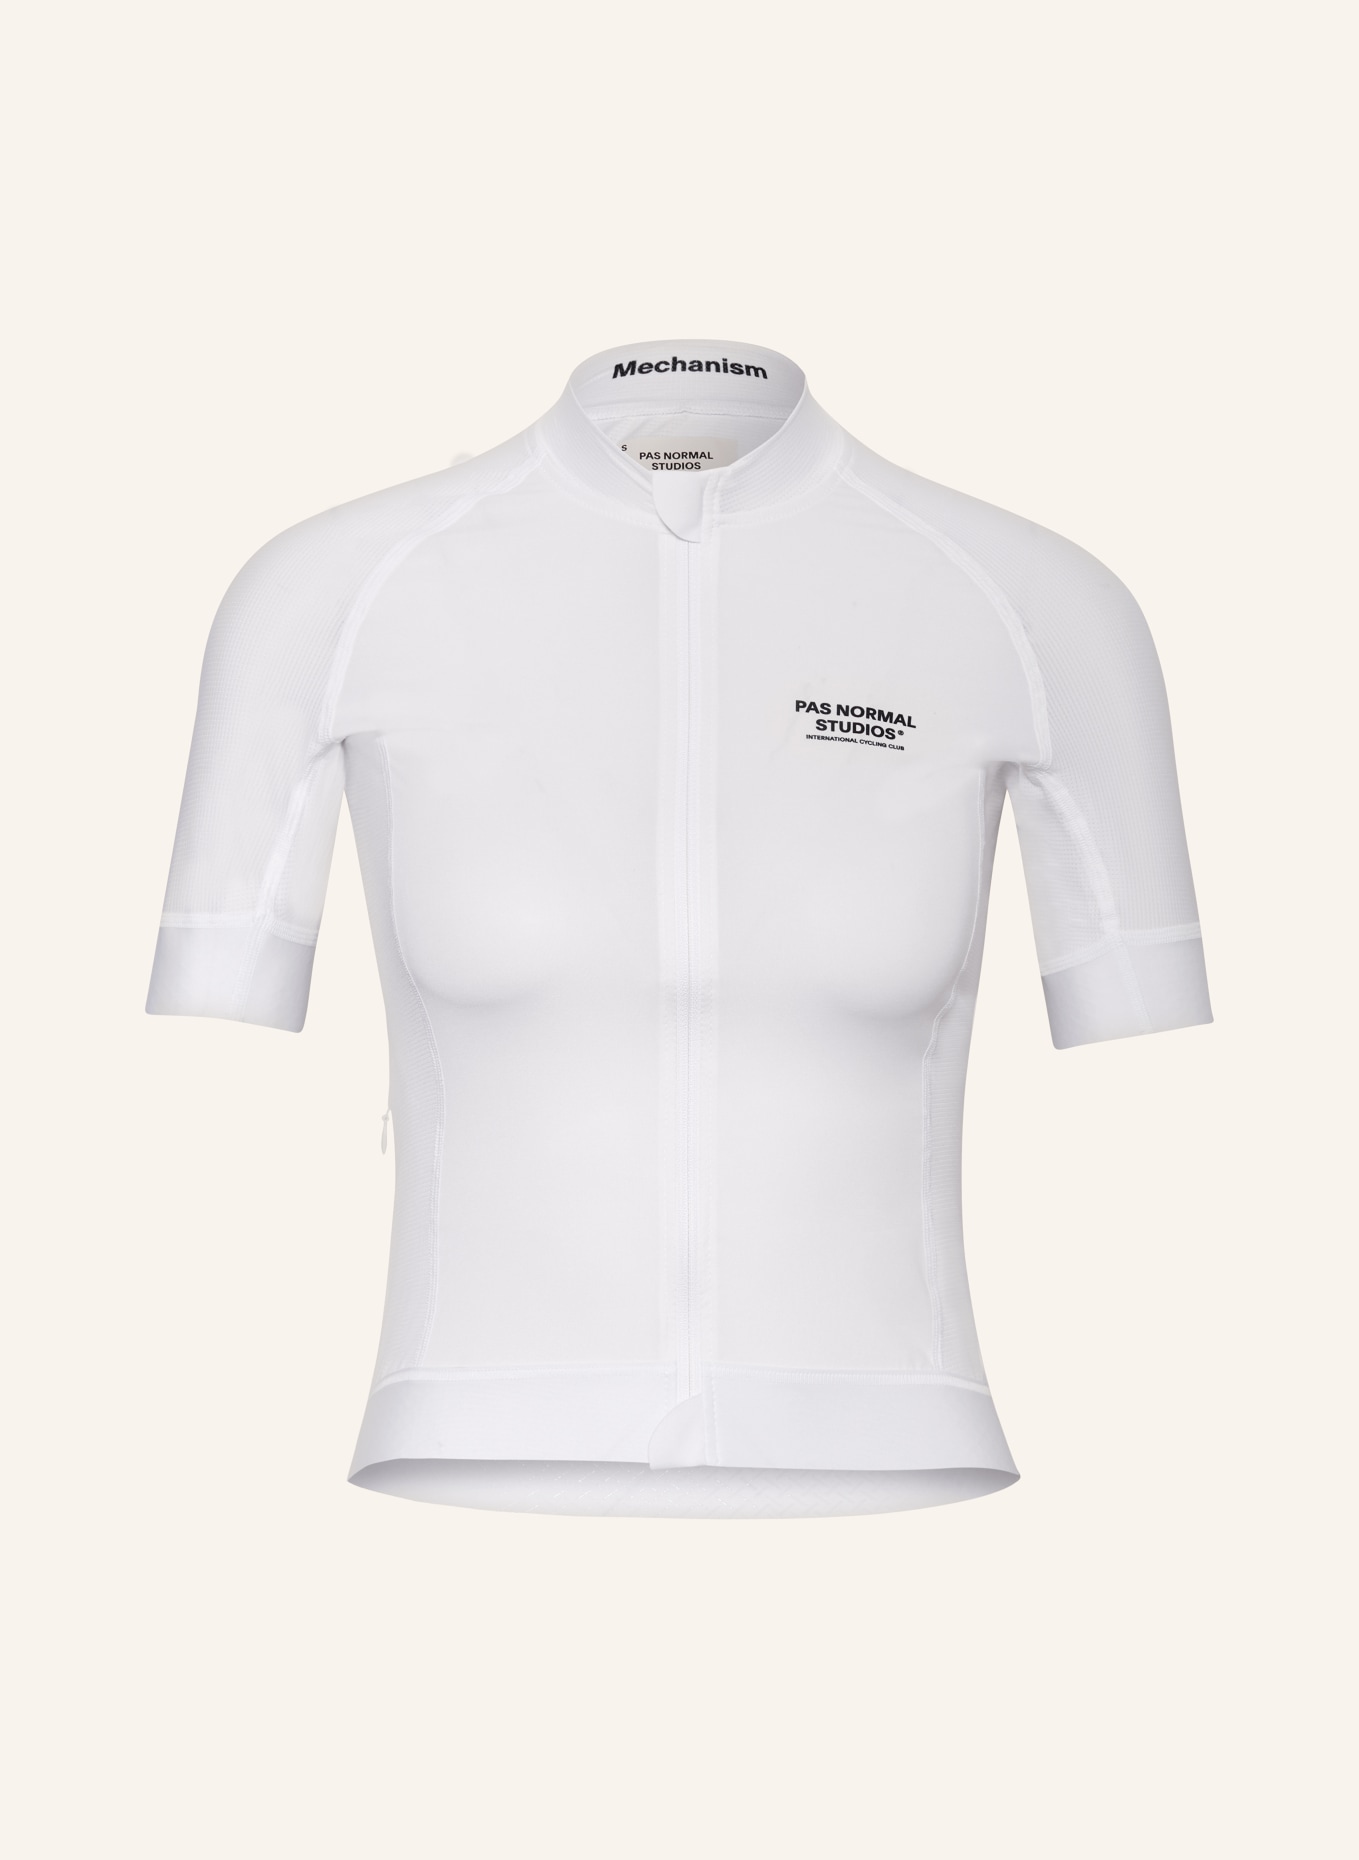 PAS NORMAL STUDIOS Cycling jersey MECHANISM, Color: WHITE (Image 1)